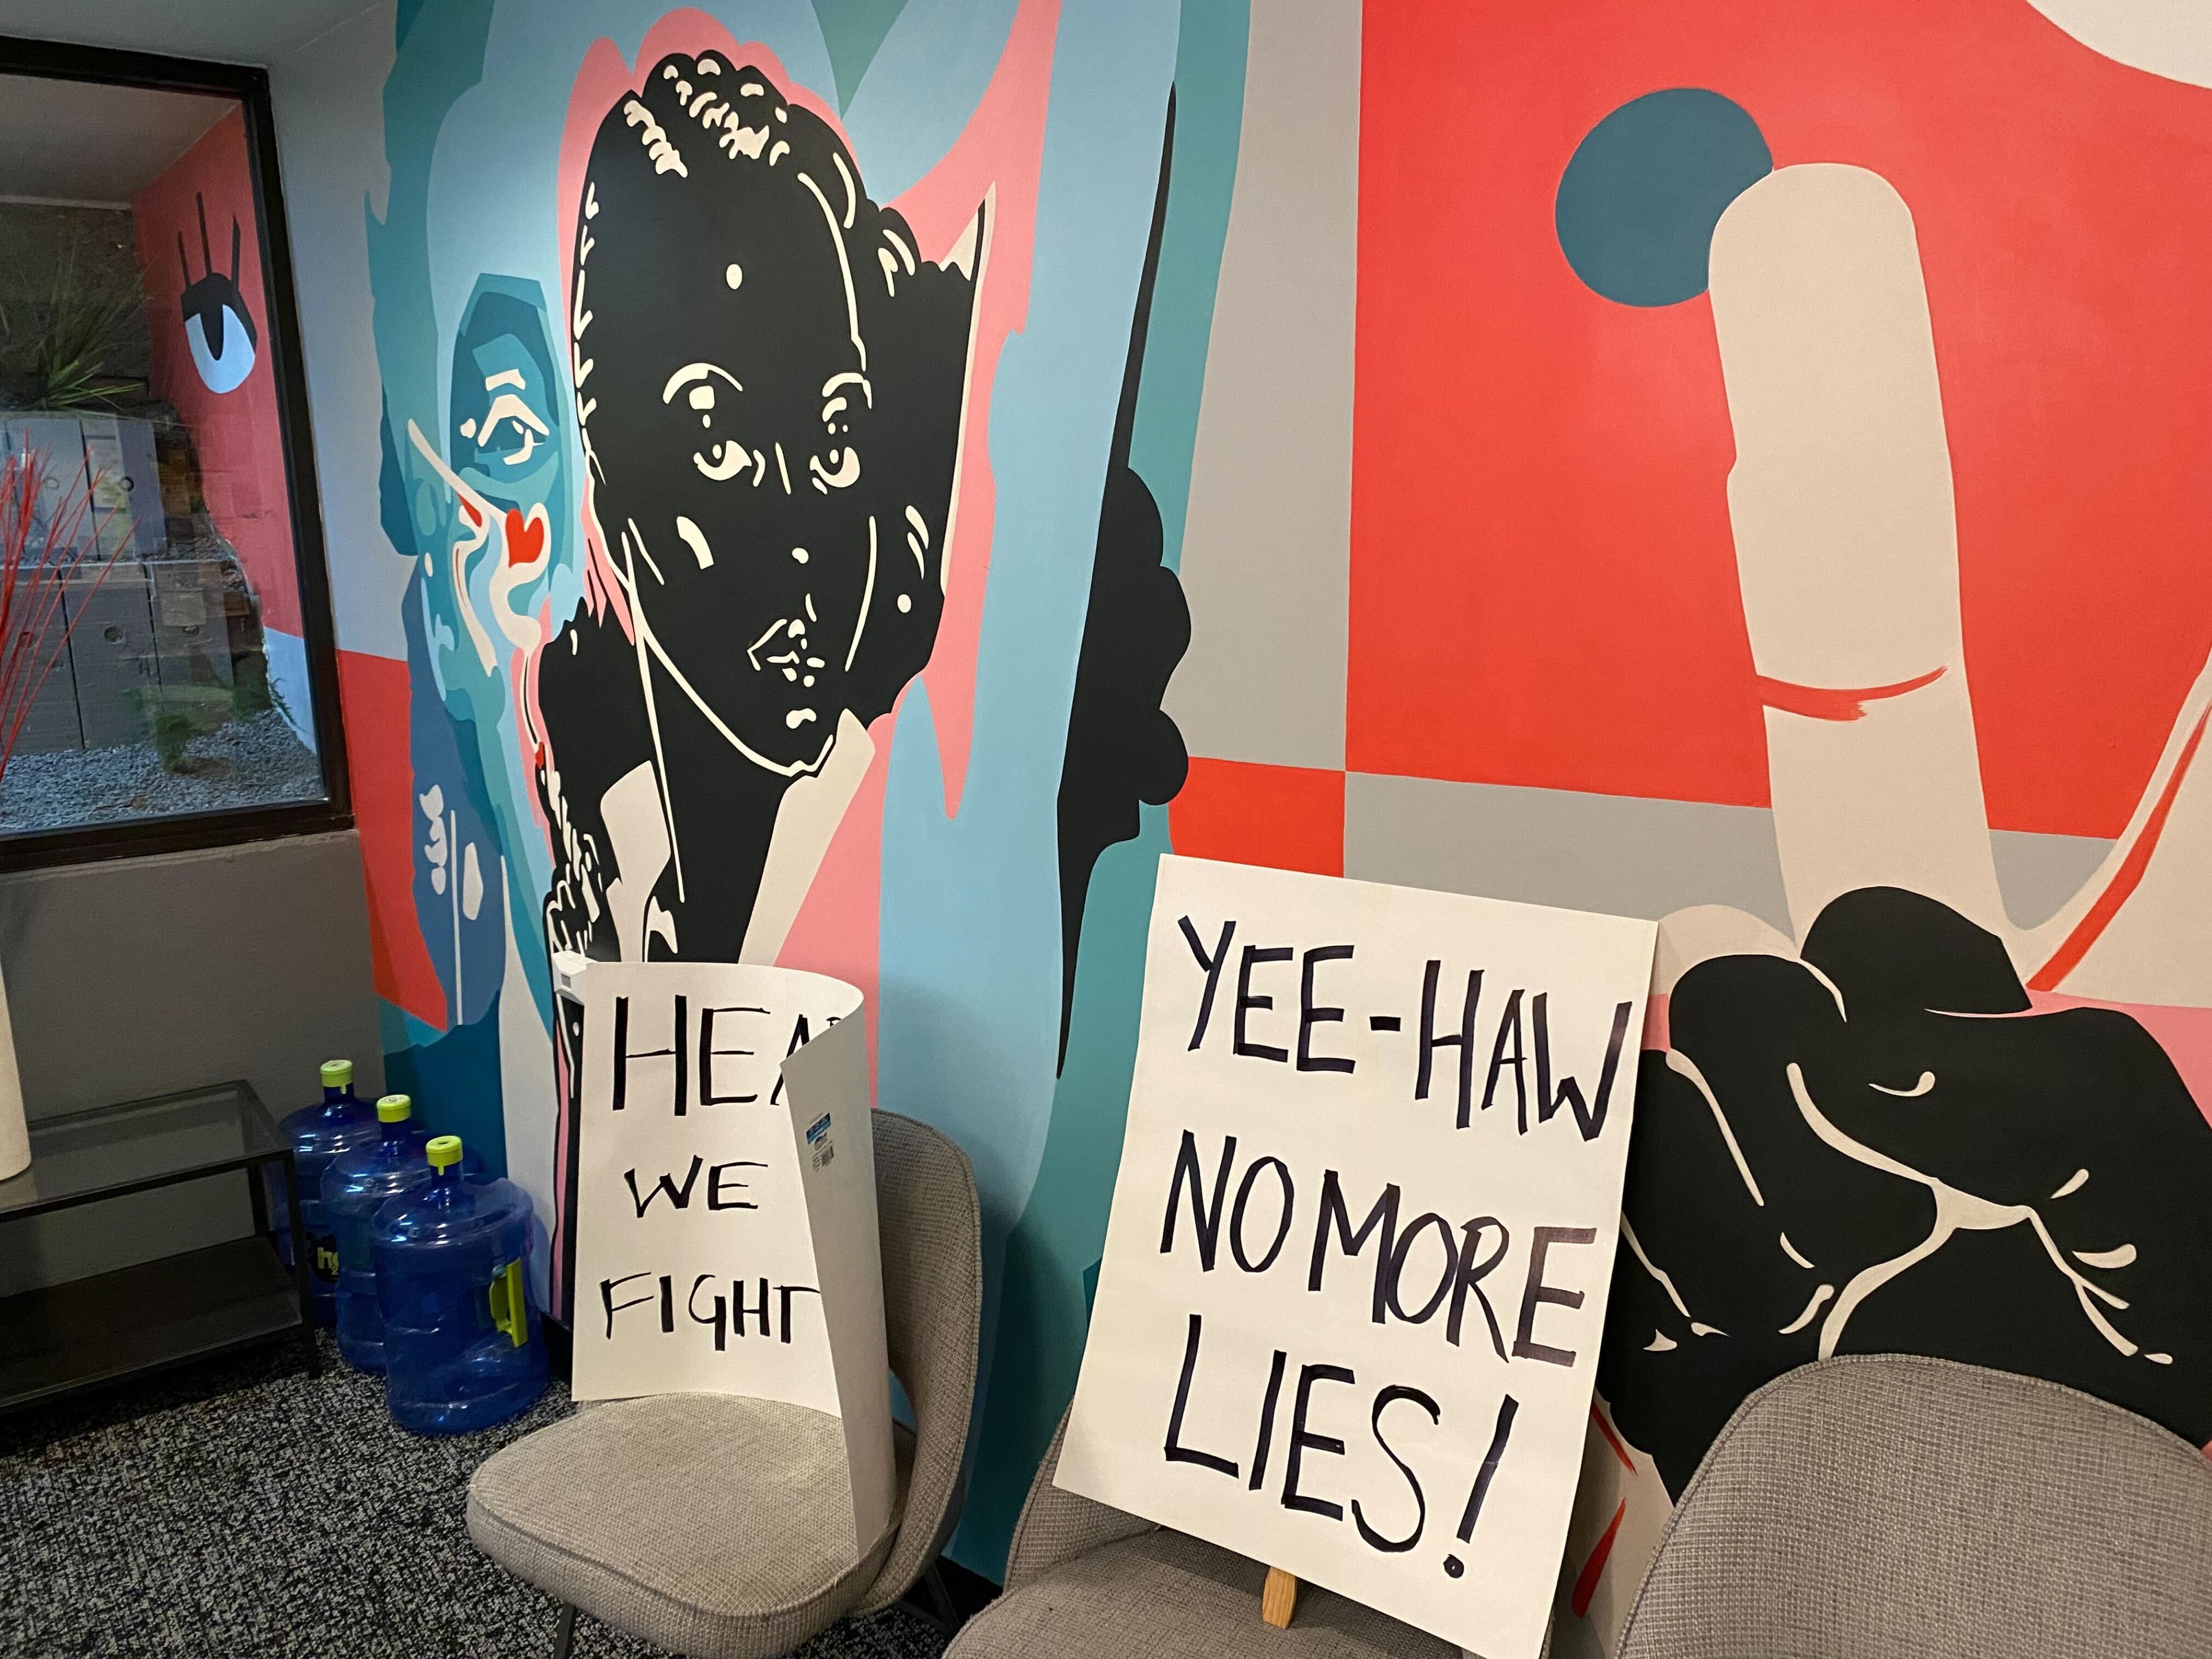 A colorful mural with abstract figures and a dog's face, has protest signs reading &quot;HEAR WE FIGHT&quot; and &quot;YEE-HAW NO MORE LIES!&quot; placed near comfy chairs.